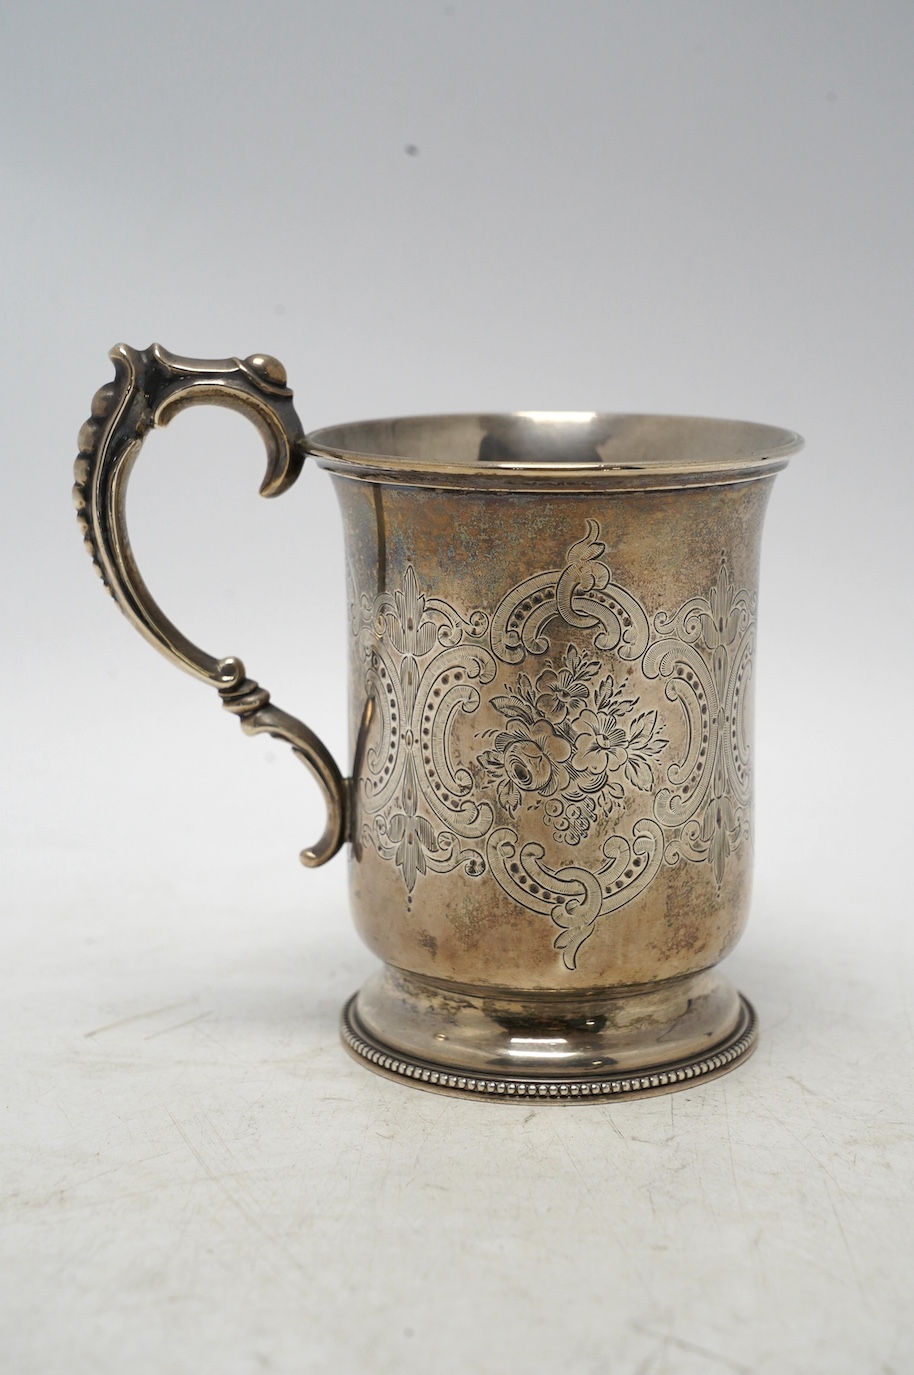 A Victorian engraved silver christening mug, by Edward Charles Brown, London, 1872, 11cm, 5.4oz. Condition - fair to good